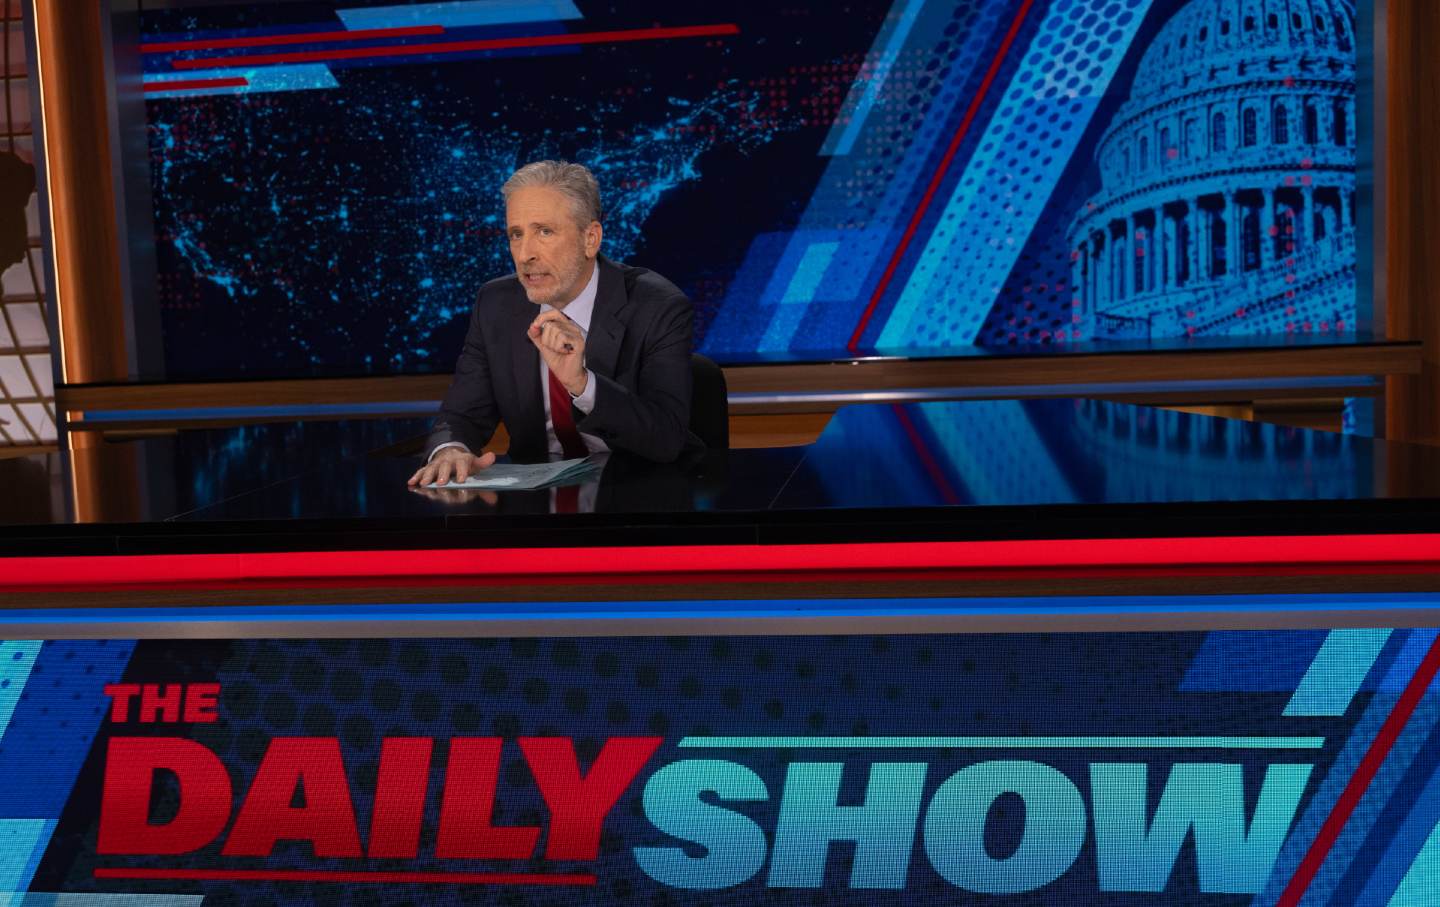 Jon Stewart on the set of The Daily Show.